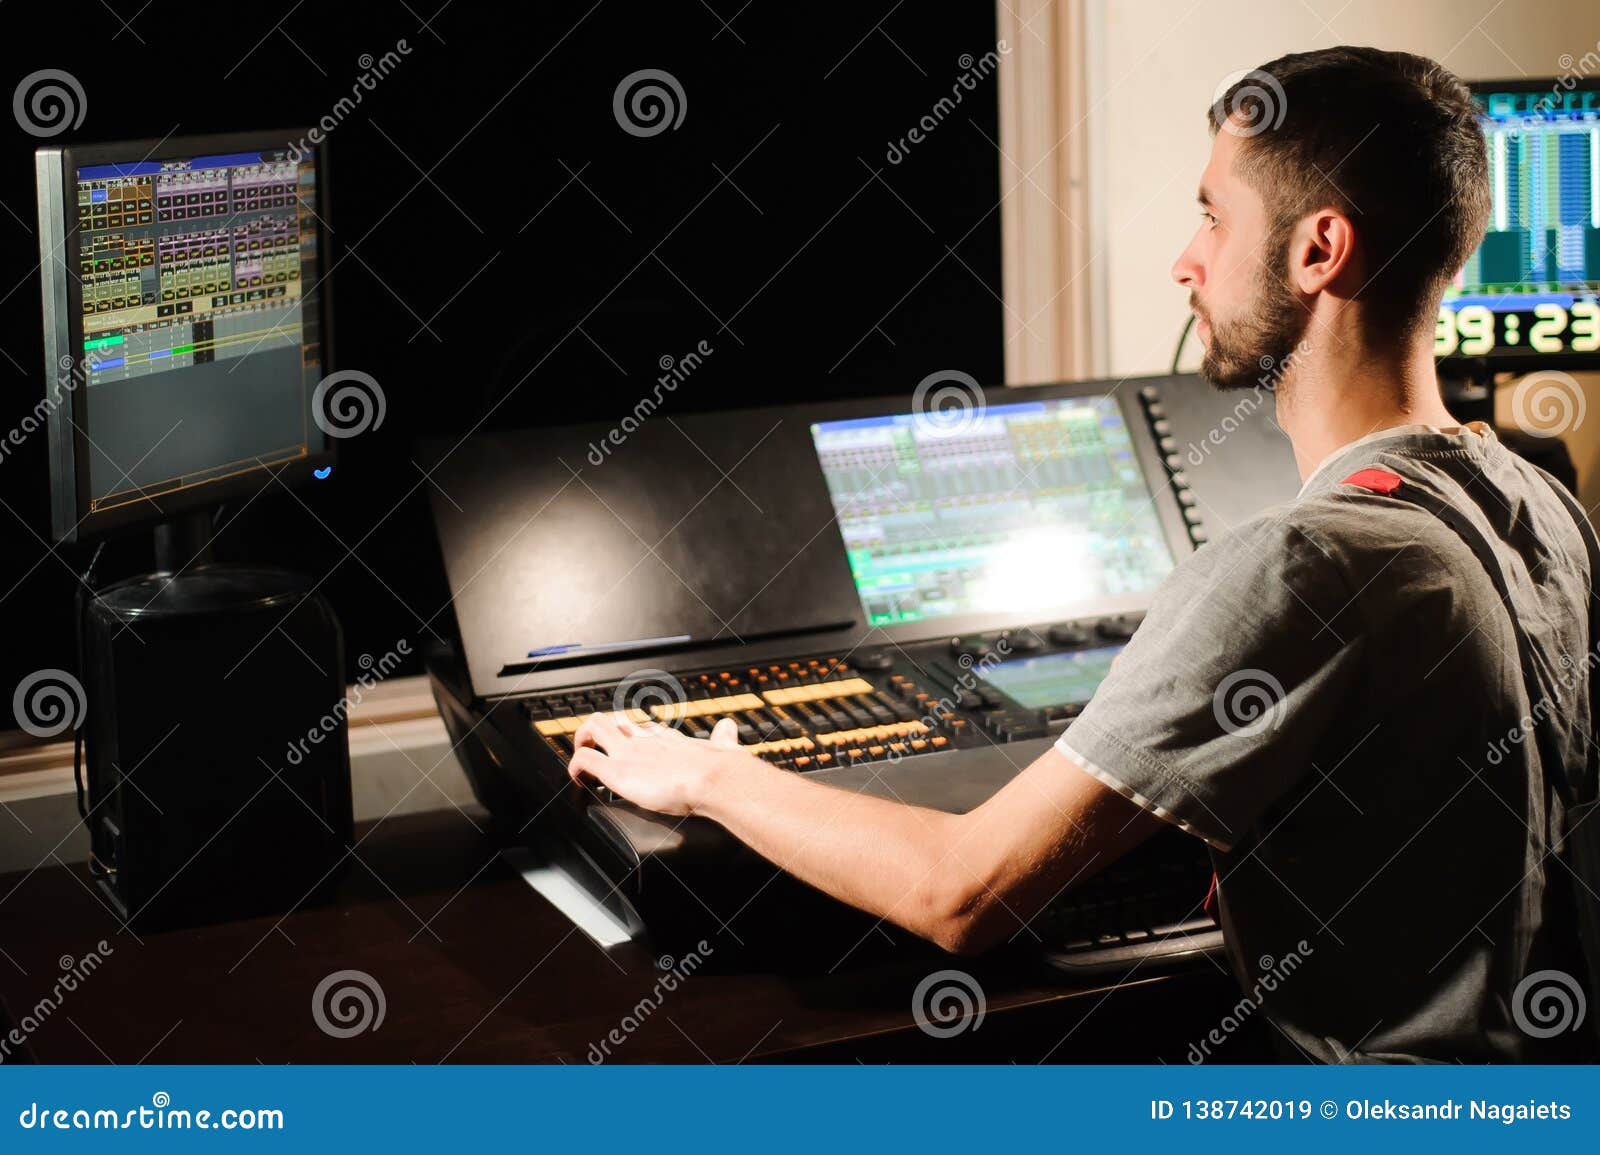 A Lighting Engineer with Lights Technicians Control Stock Image - Image of background, desk: 138742019